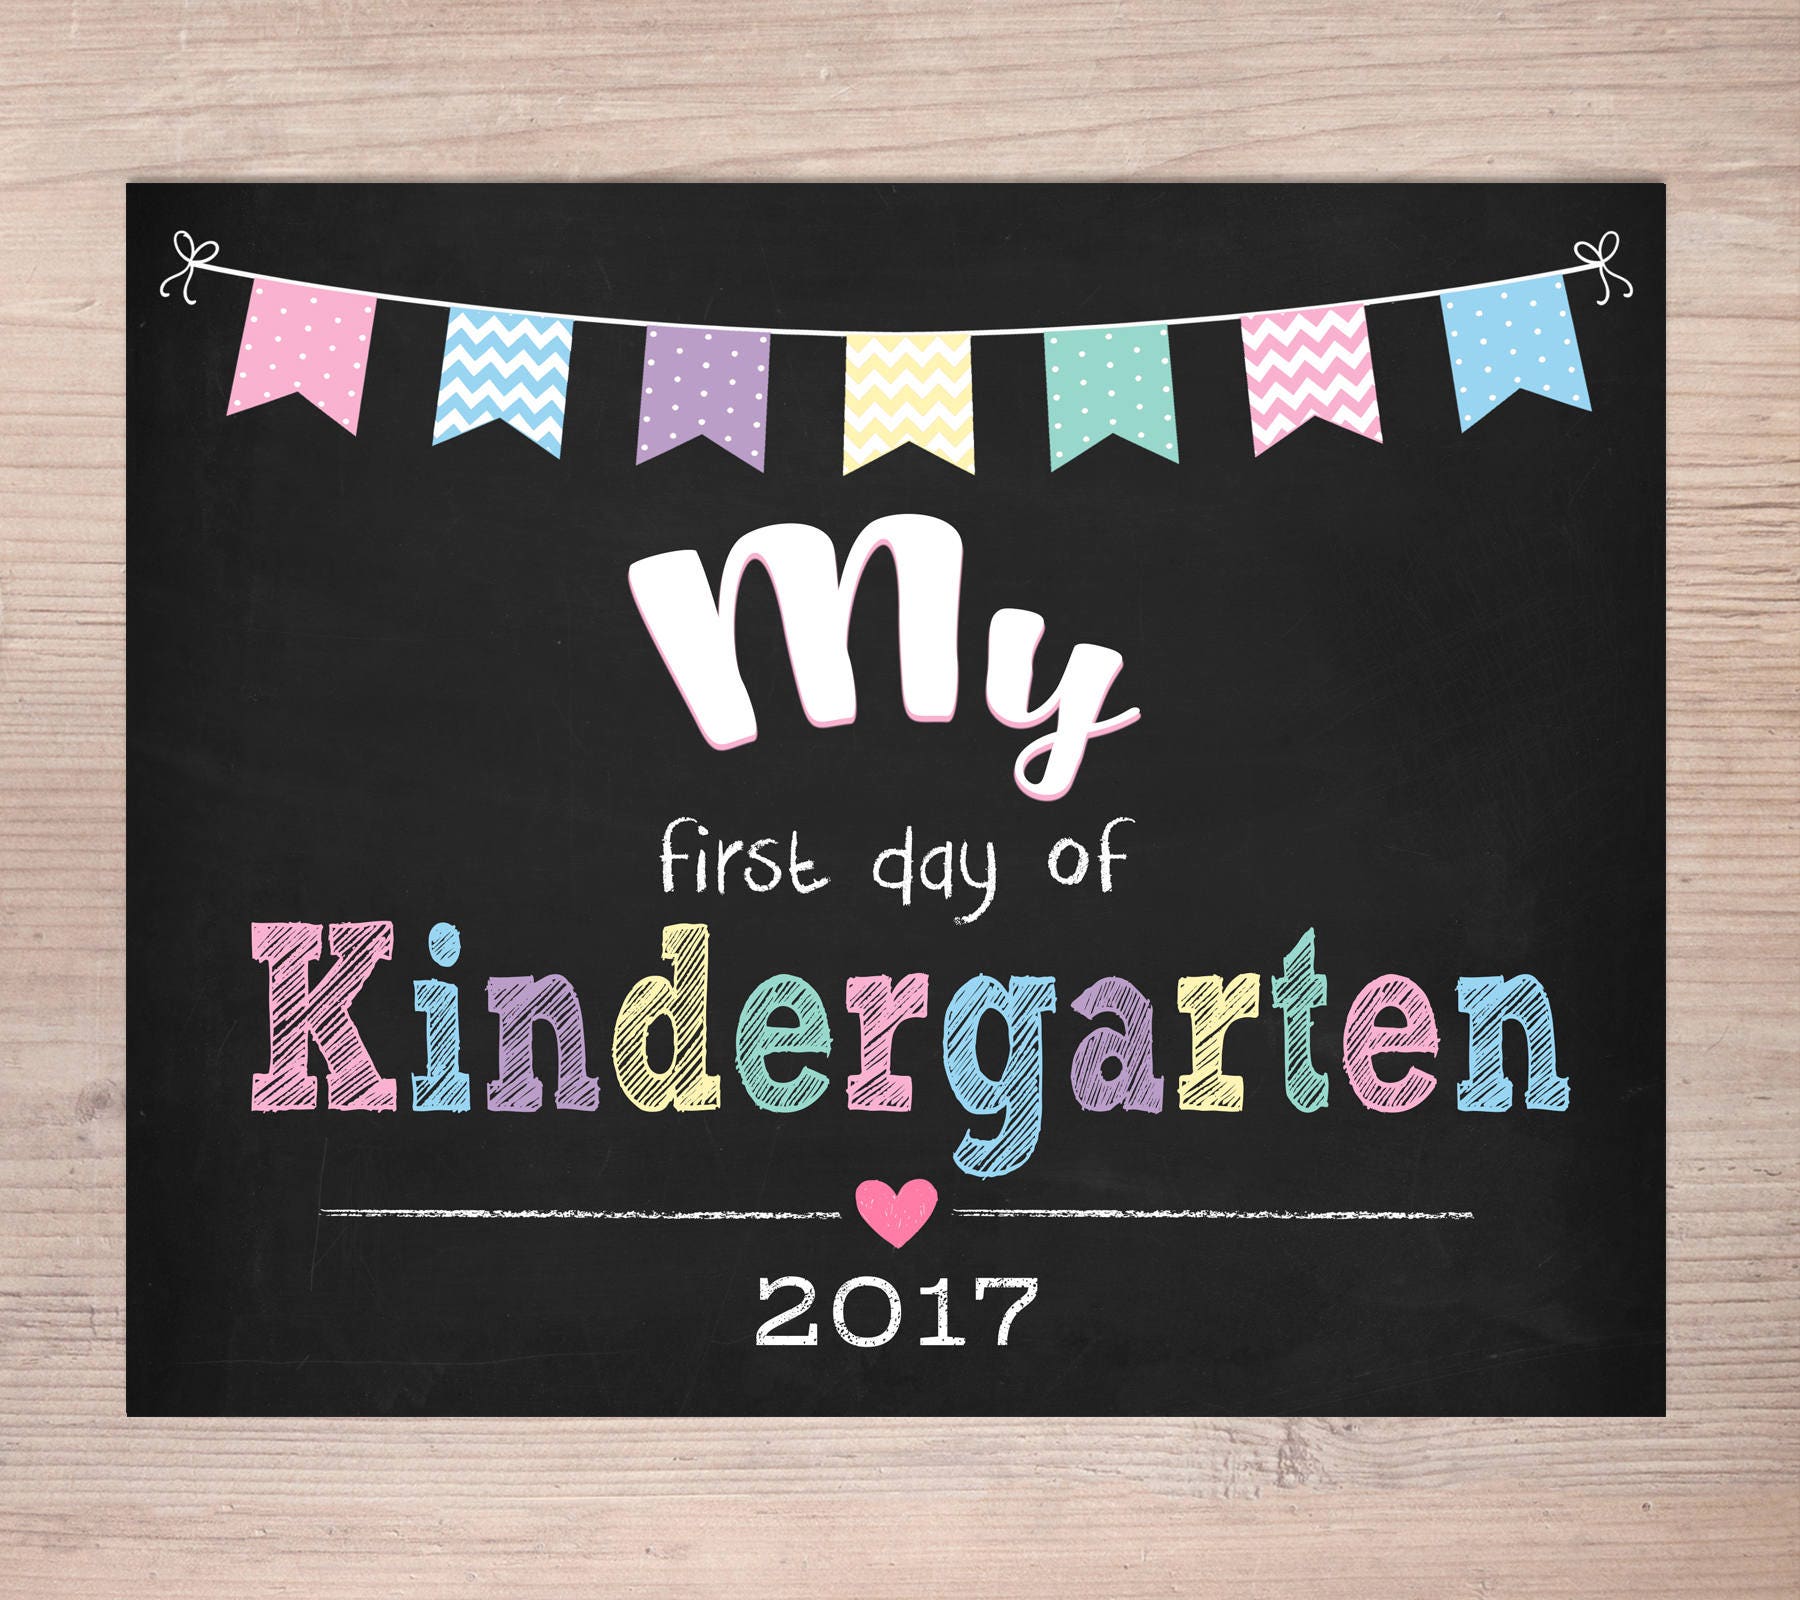 my-first-day-of-kindergarten-first-day-of-school-sign